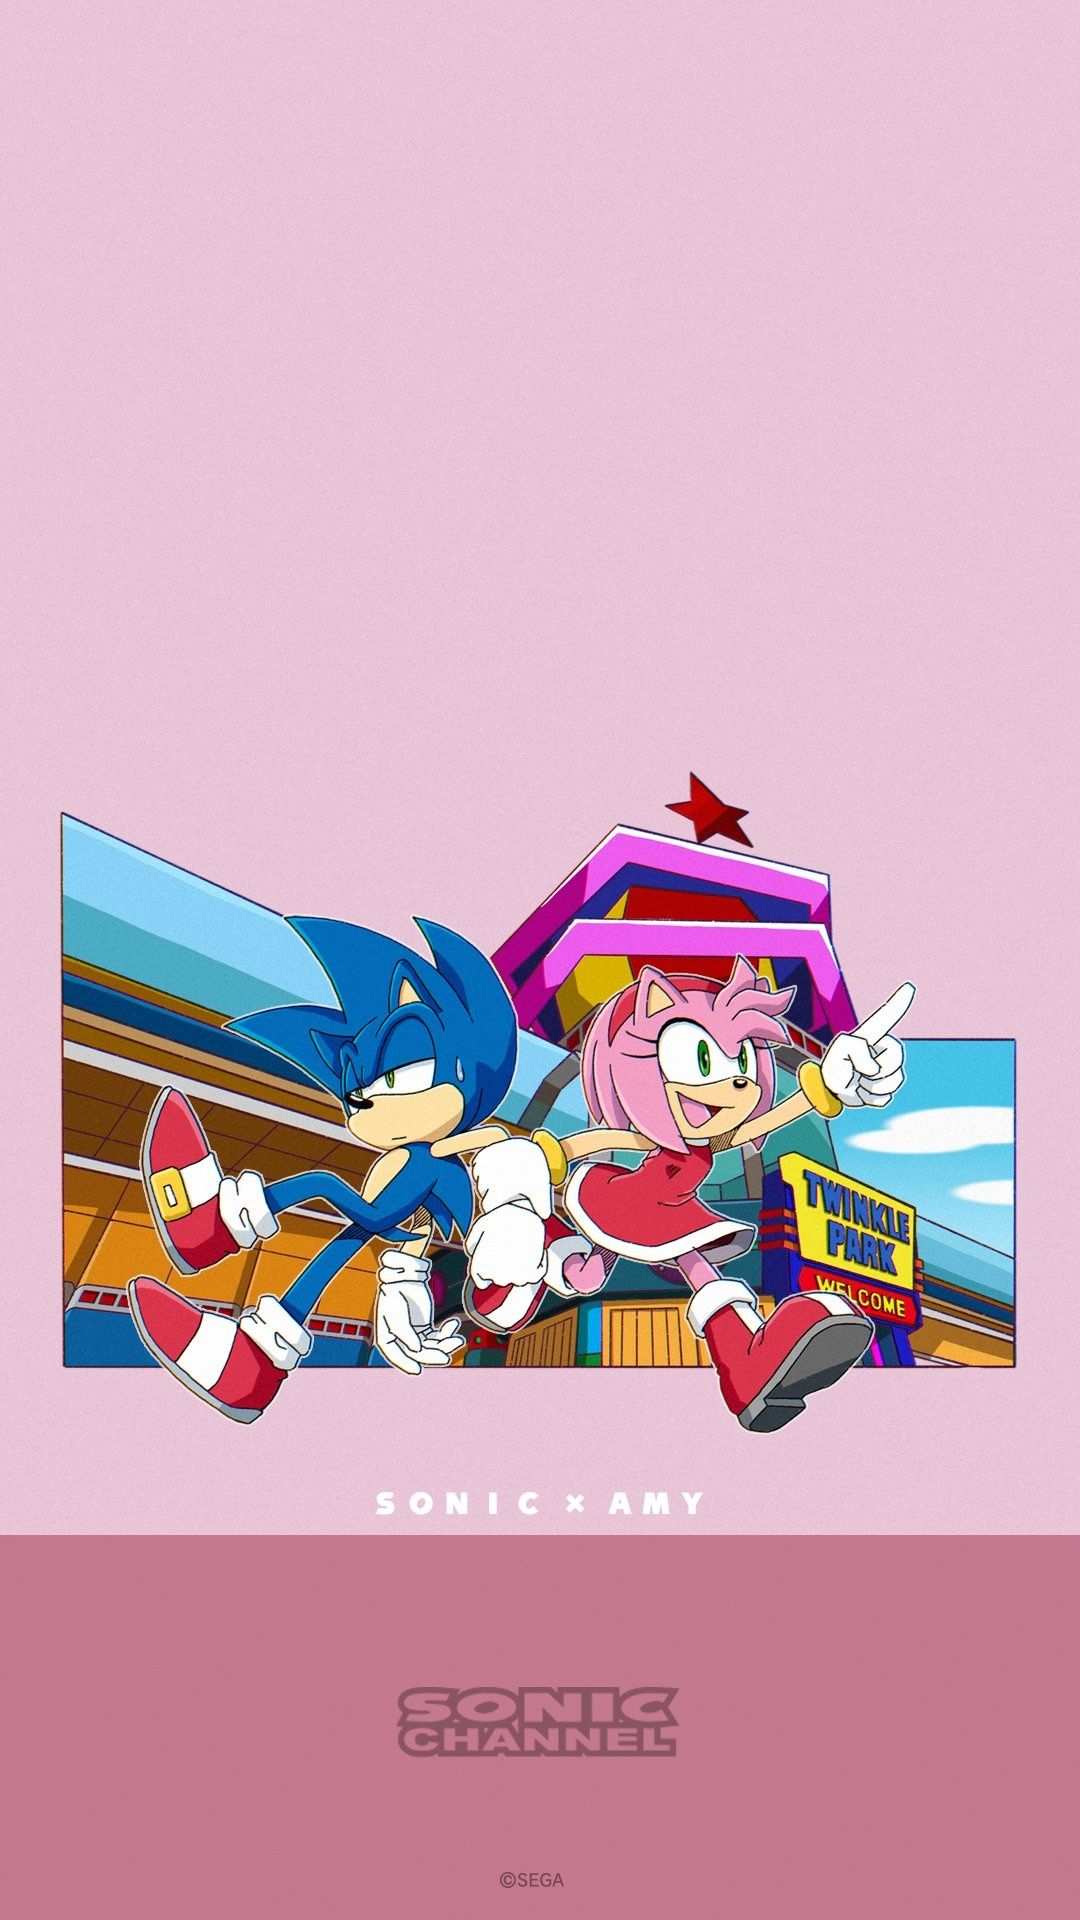 Wallpaper / Video Game Sonic the Hedgehog Phone Wallpaper, Sneakers, Boots, Sonic Channel, Amy Rose, 1080x1920 free download